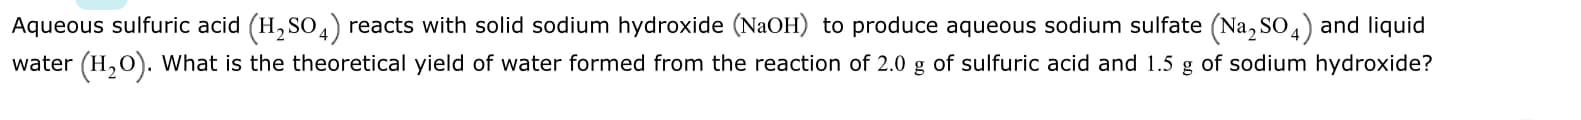 Aqueous sulfuric acid (H, SO 4) reacts with solid sodium hydroxide (NaOH) to produce aqueous sodium sulfate (Na, SO4) and liquid
water (H,O). What is the theoretical yield of water formed from the reaction of 2.0 g of sulfuric acid and 1.5 g of sodium hydroxide?
